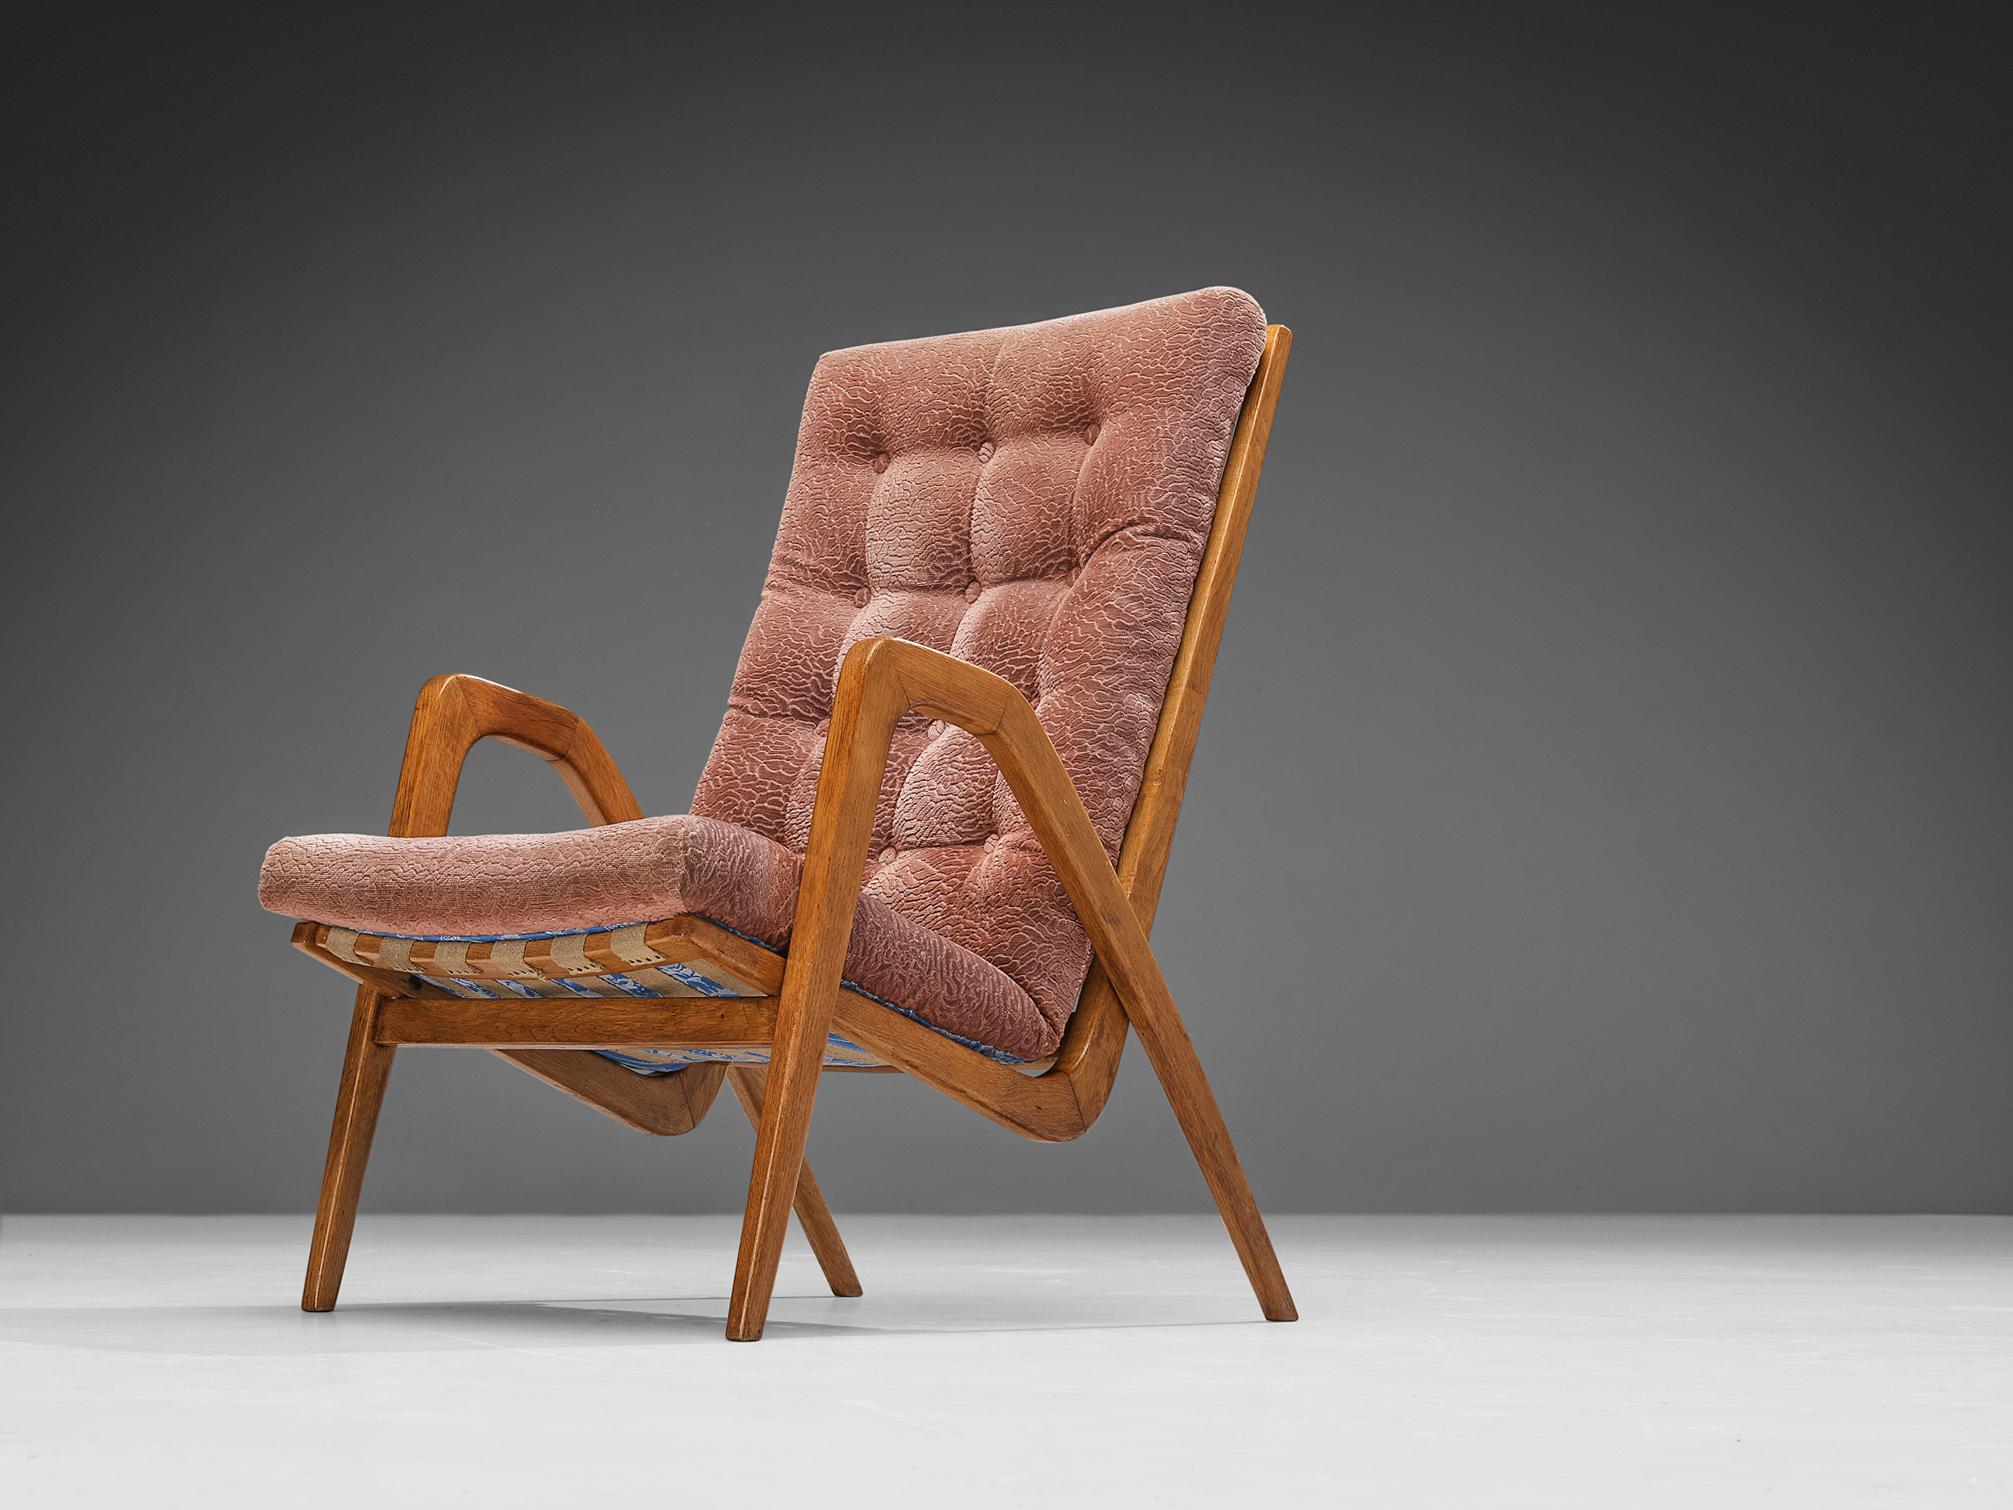 Lounge chairs, oak, fabric, Europe, 1950s

Refined lounge chair that features a high backrest and sculptural form. The chair is made in the late Art Deco period, as they show its distinctive characteristics, such as the thick tufted seat and the